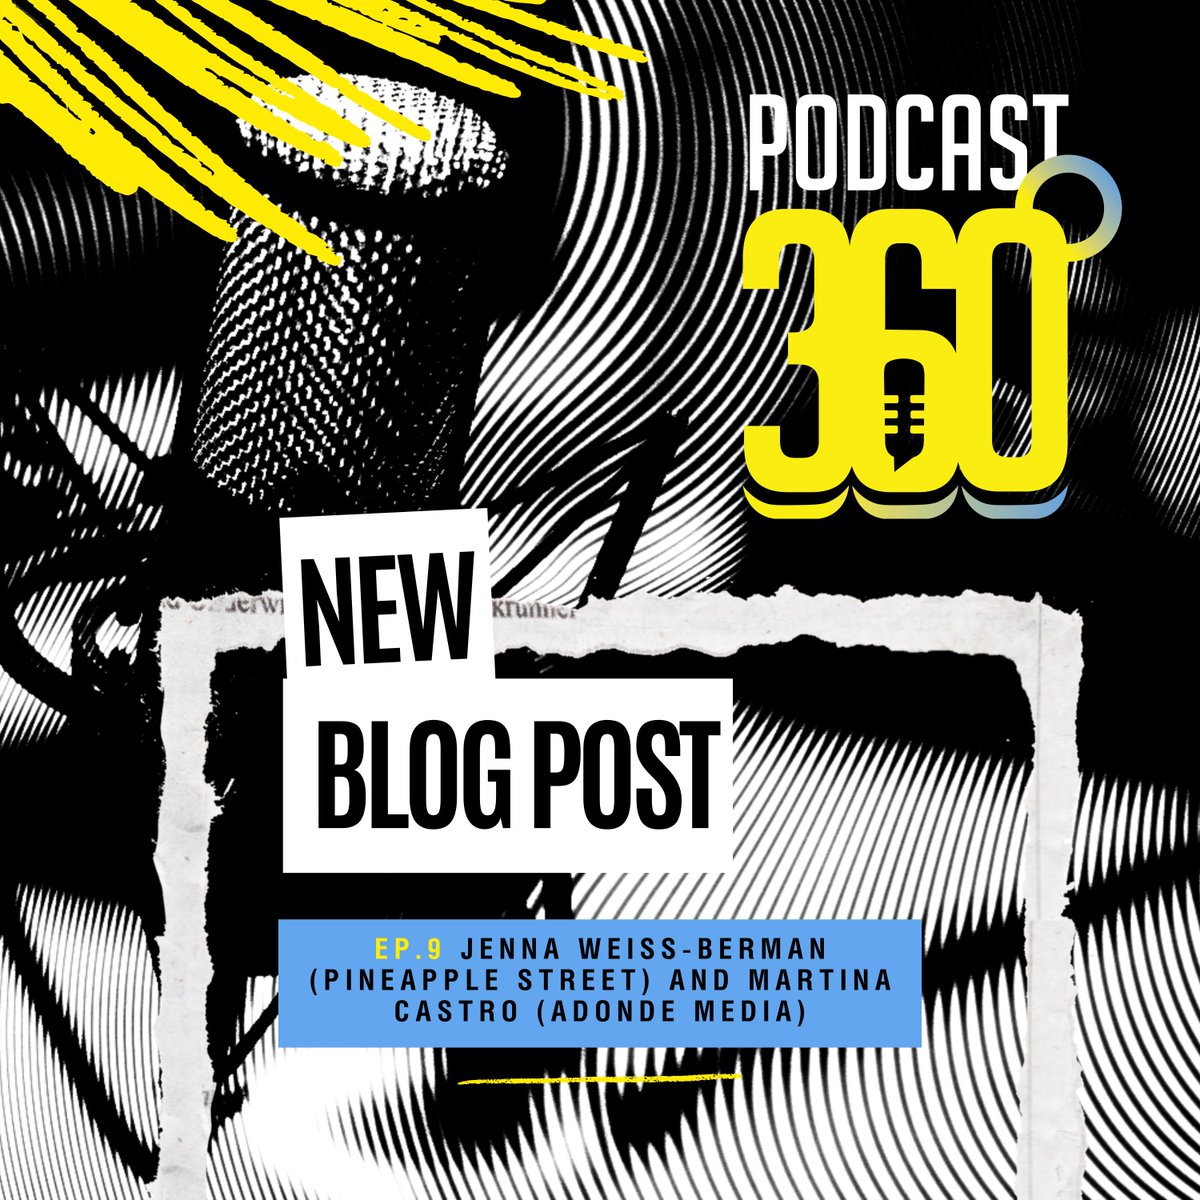 🎙️ Dive into our latest #blogpost featuring an insightful interview between Jenna Weiss-Berman from @pineapplemedia and Martina Castro, founder and CEO of @AdondeMedia. thepodcastacademy.com/podcasting-ind… #thepodcastacademy #podcasting #podcastcommunity #podcasters #blog @DCPofficial